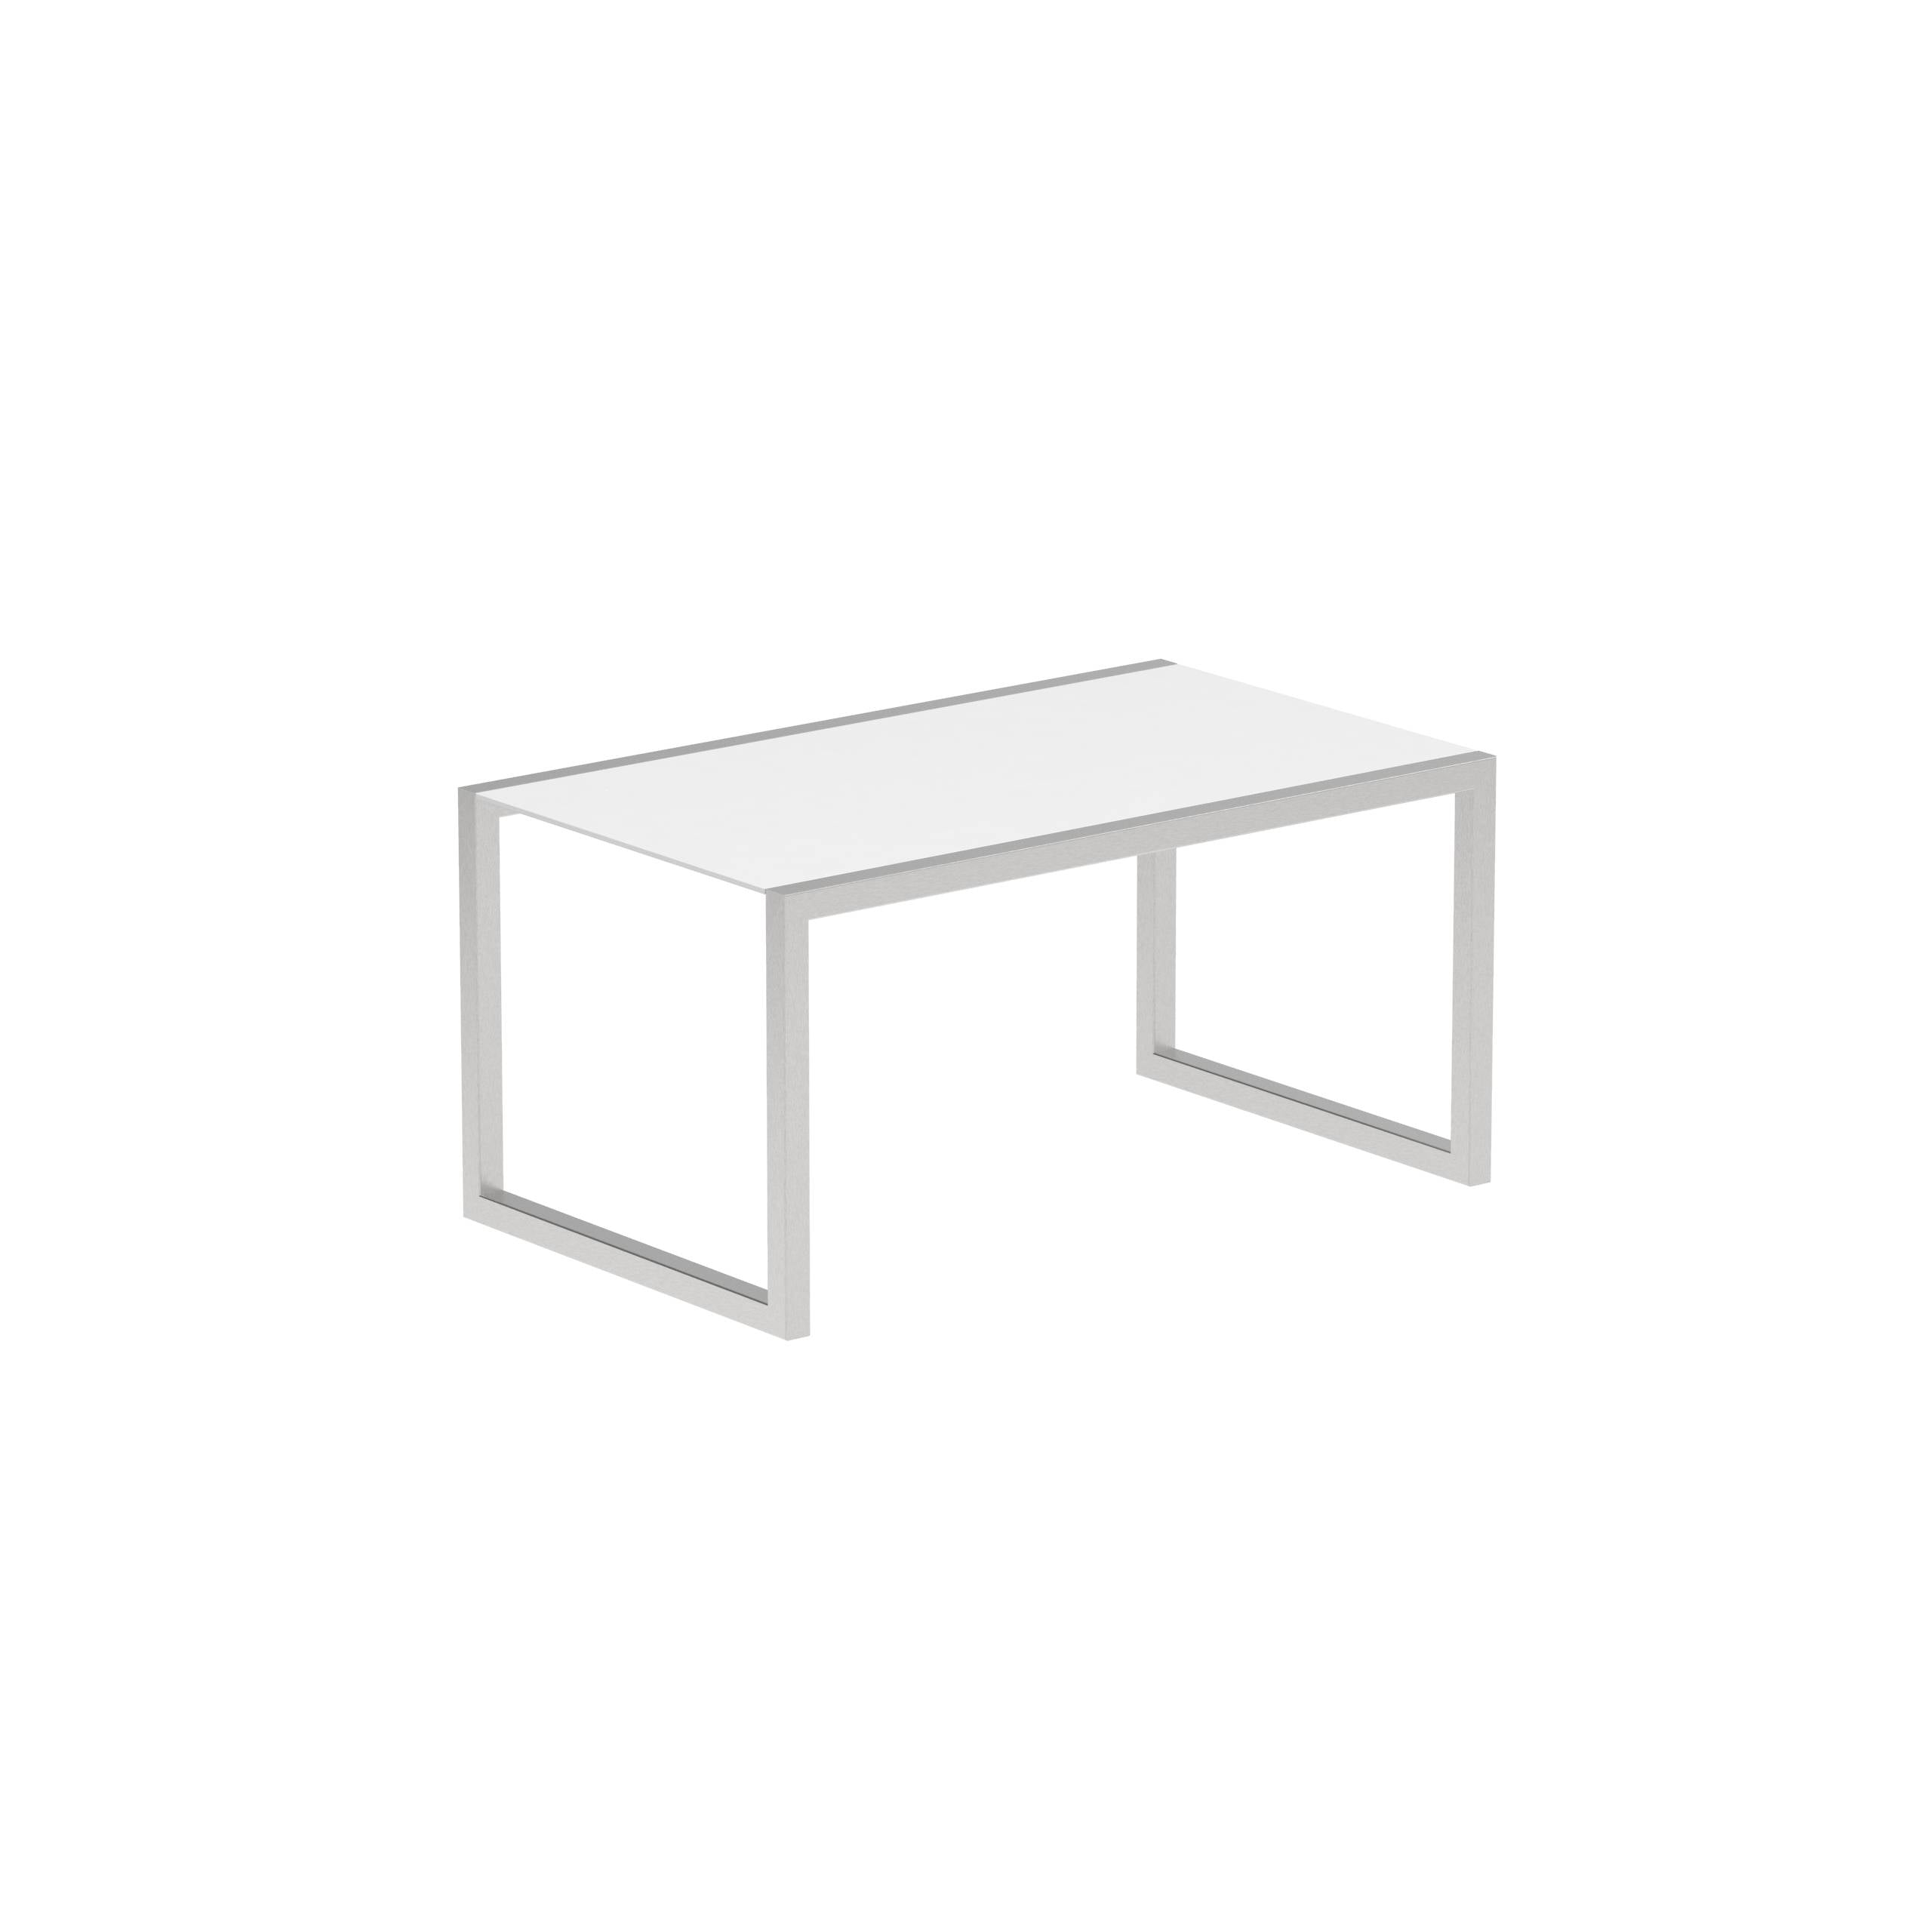 Ninix Table 150x90 Cm With Stainless Steel And Ceramic Top White